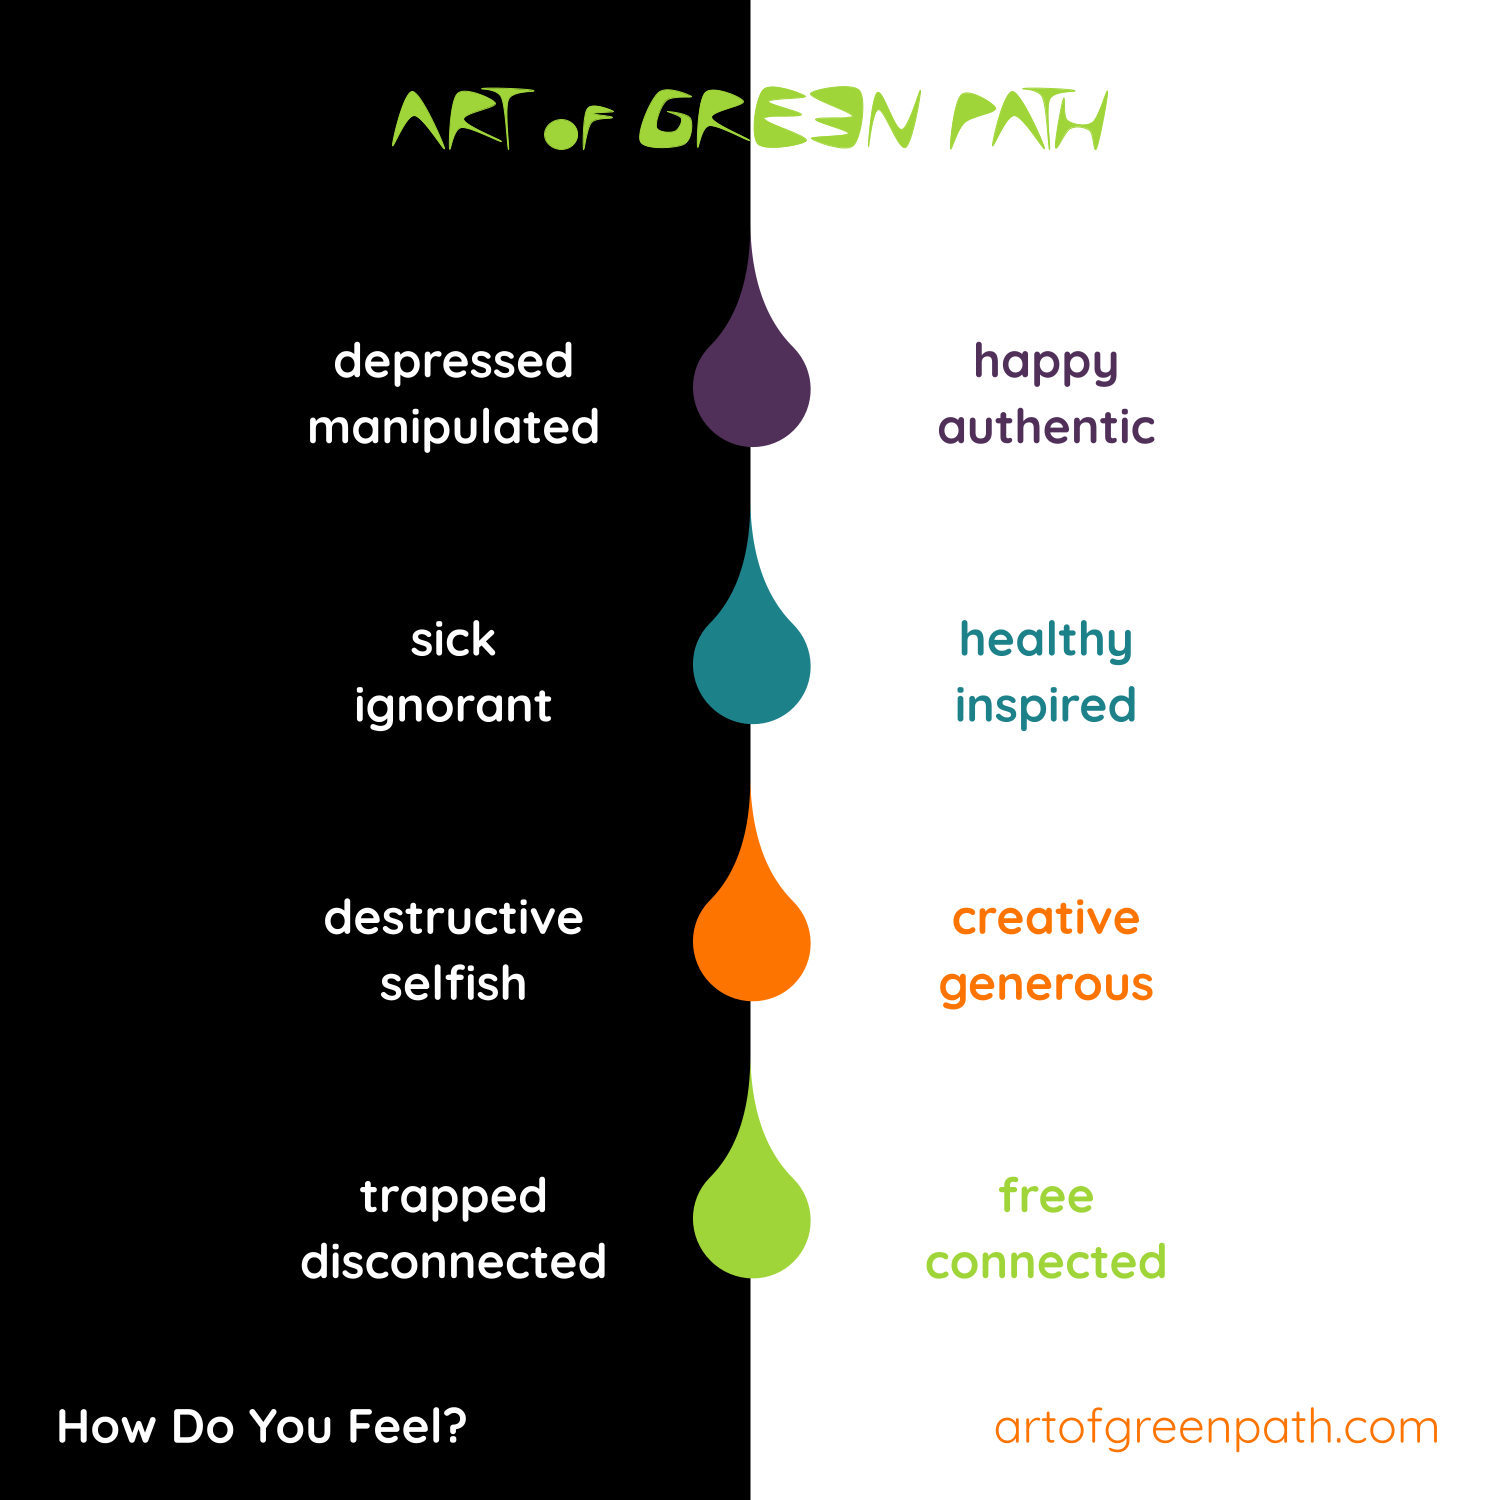 Art Of Green Path - How Do You Feel?